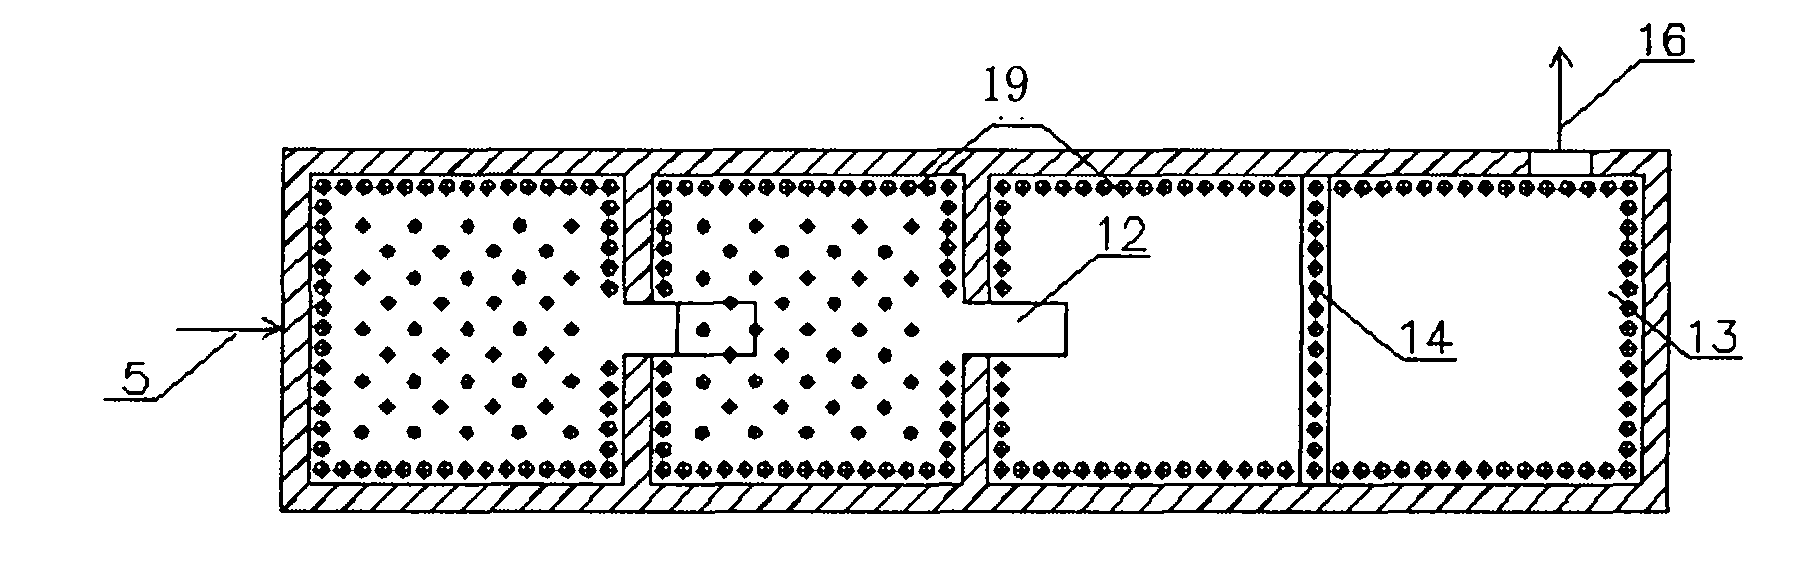 Combustion device for biomass granular fuel